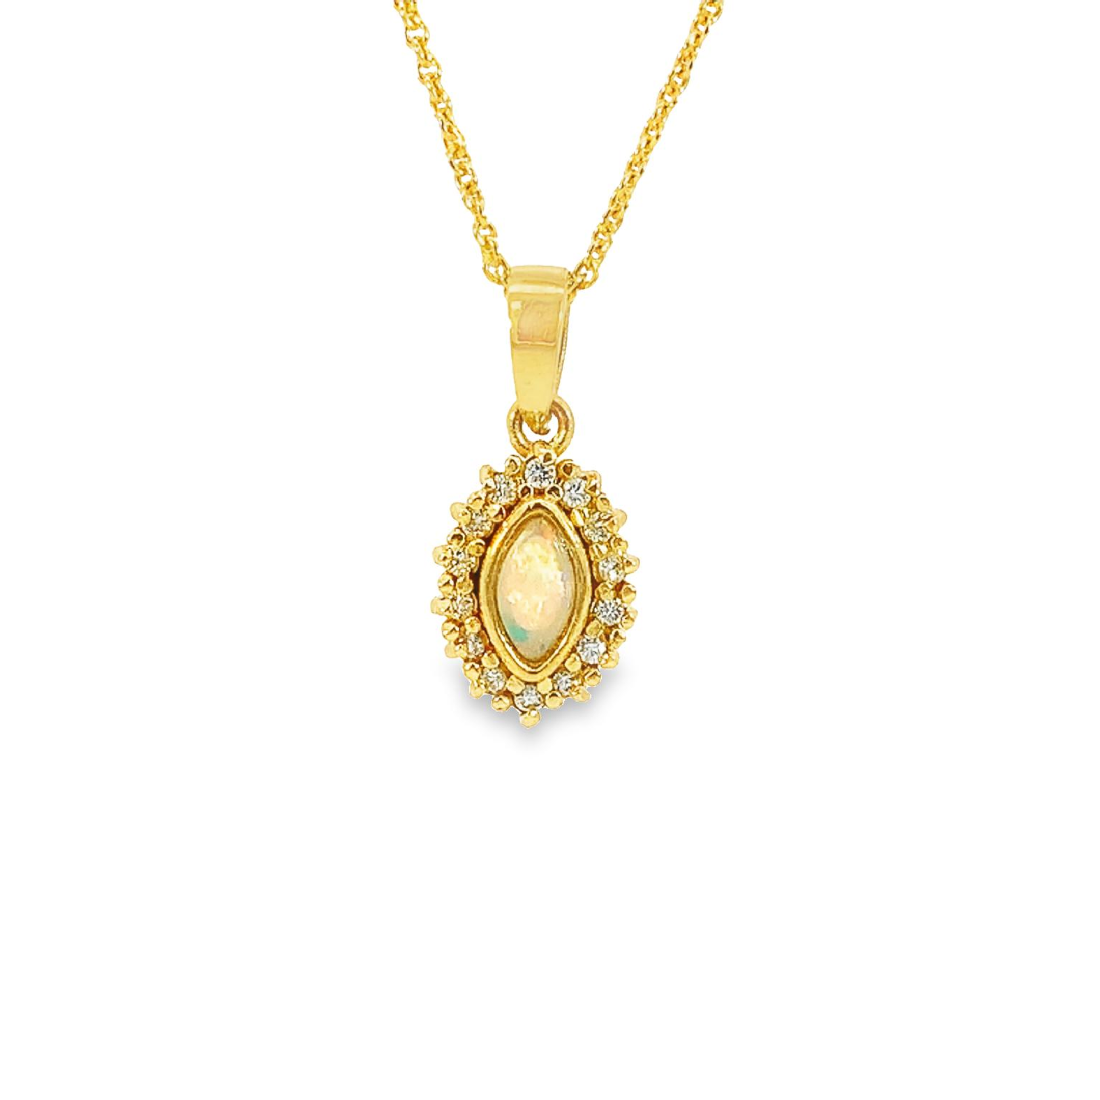 18kt Yellow Gold cluster pendant set with Crystal Opal and Diamonds - Masterpiece Jewellery Opal & Gems Sydney Australia | Online Shop